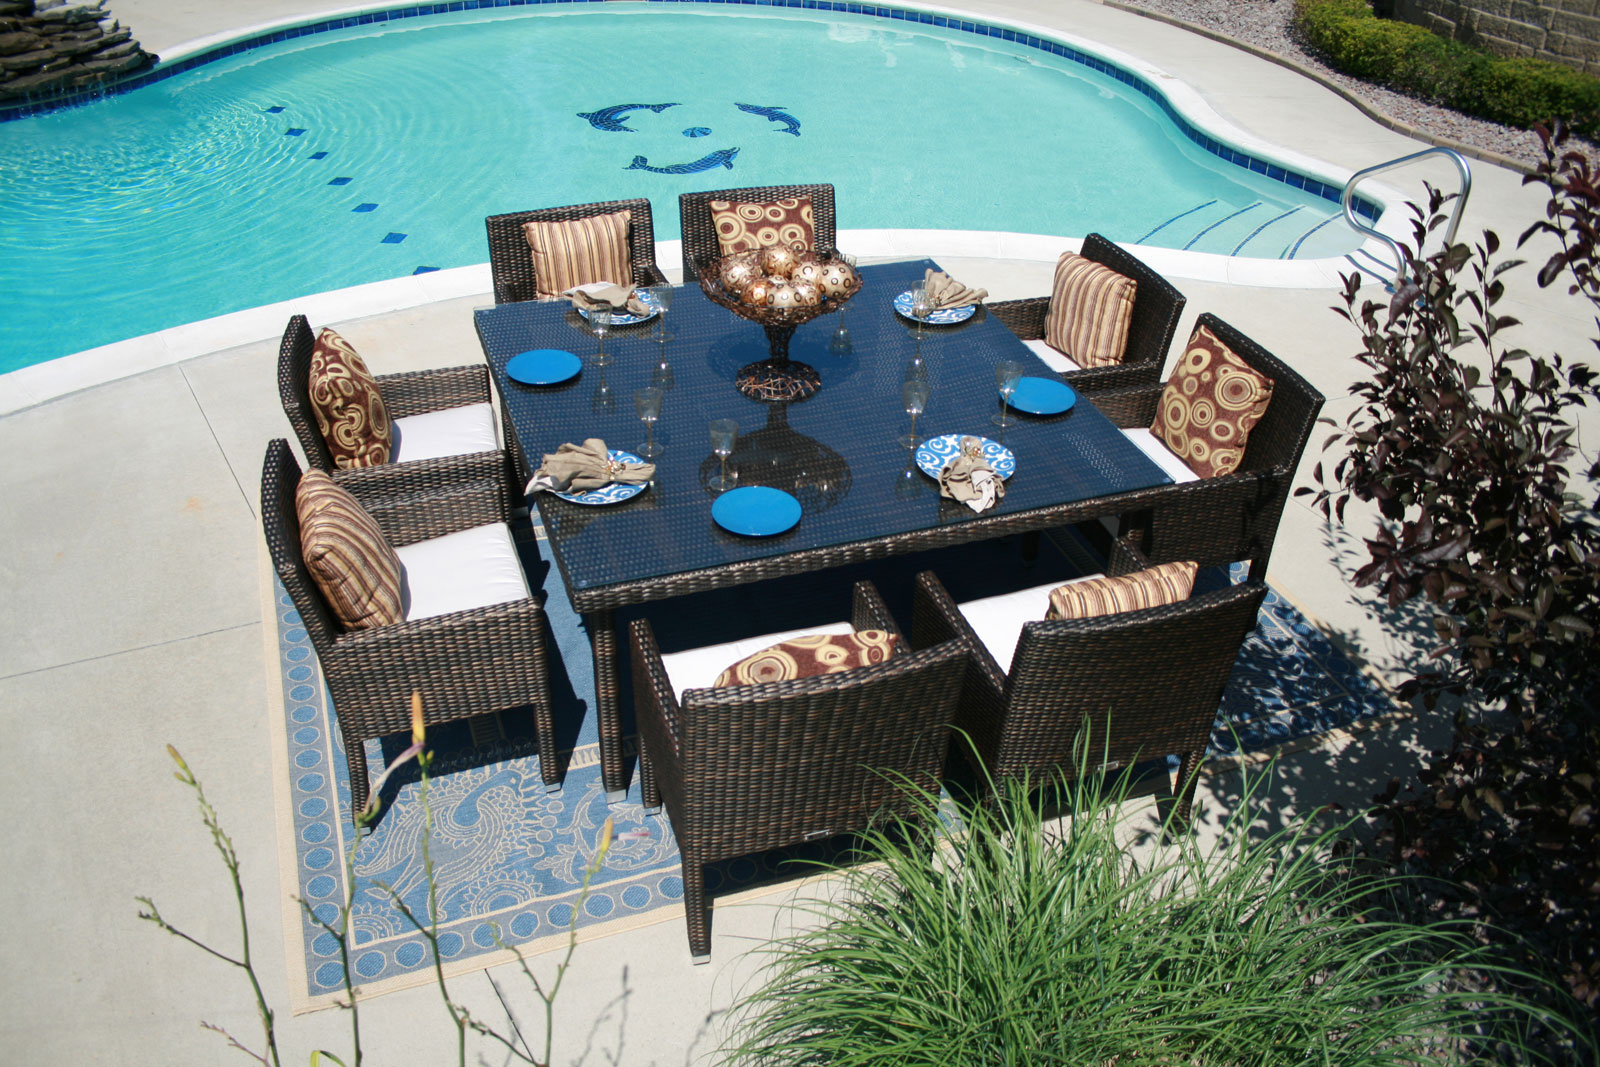 Outdoor Furniture Wicker Contemporary Outdoor Furniture Design With Wicker Traditional Furniture Using Wooden Table For Inspiration In House Furniture Contemporary Outdoor Furniture As A Companion To Nature